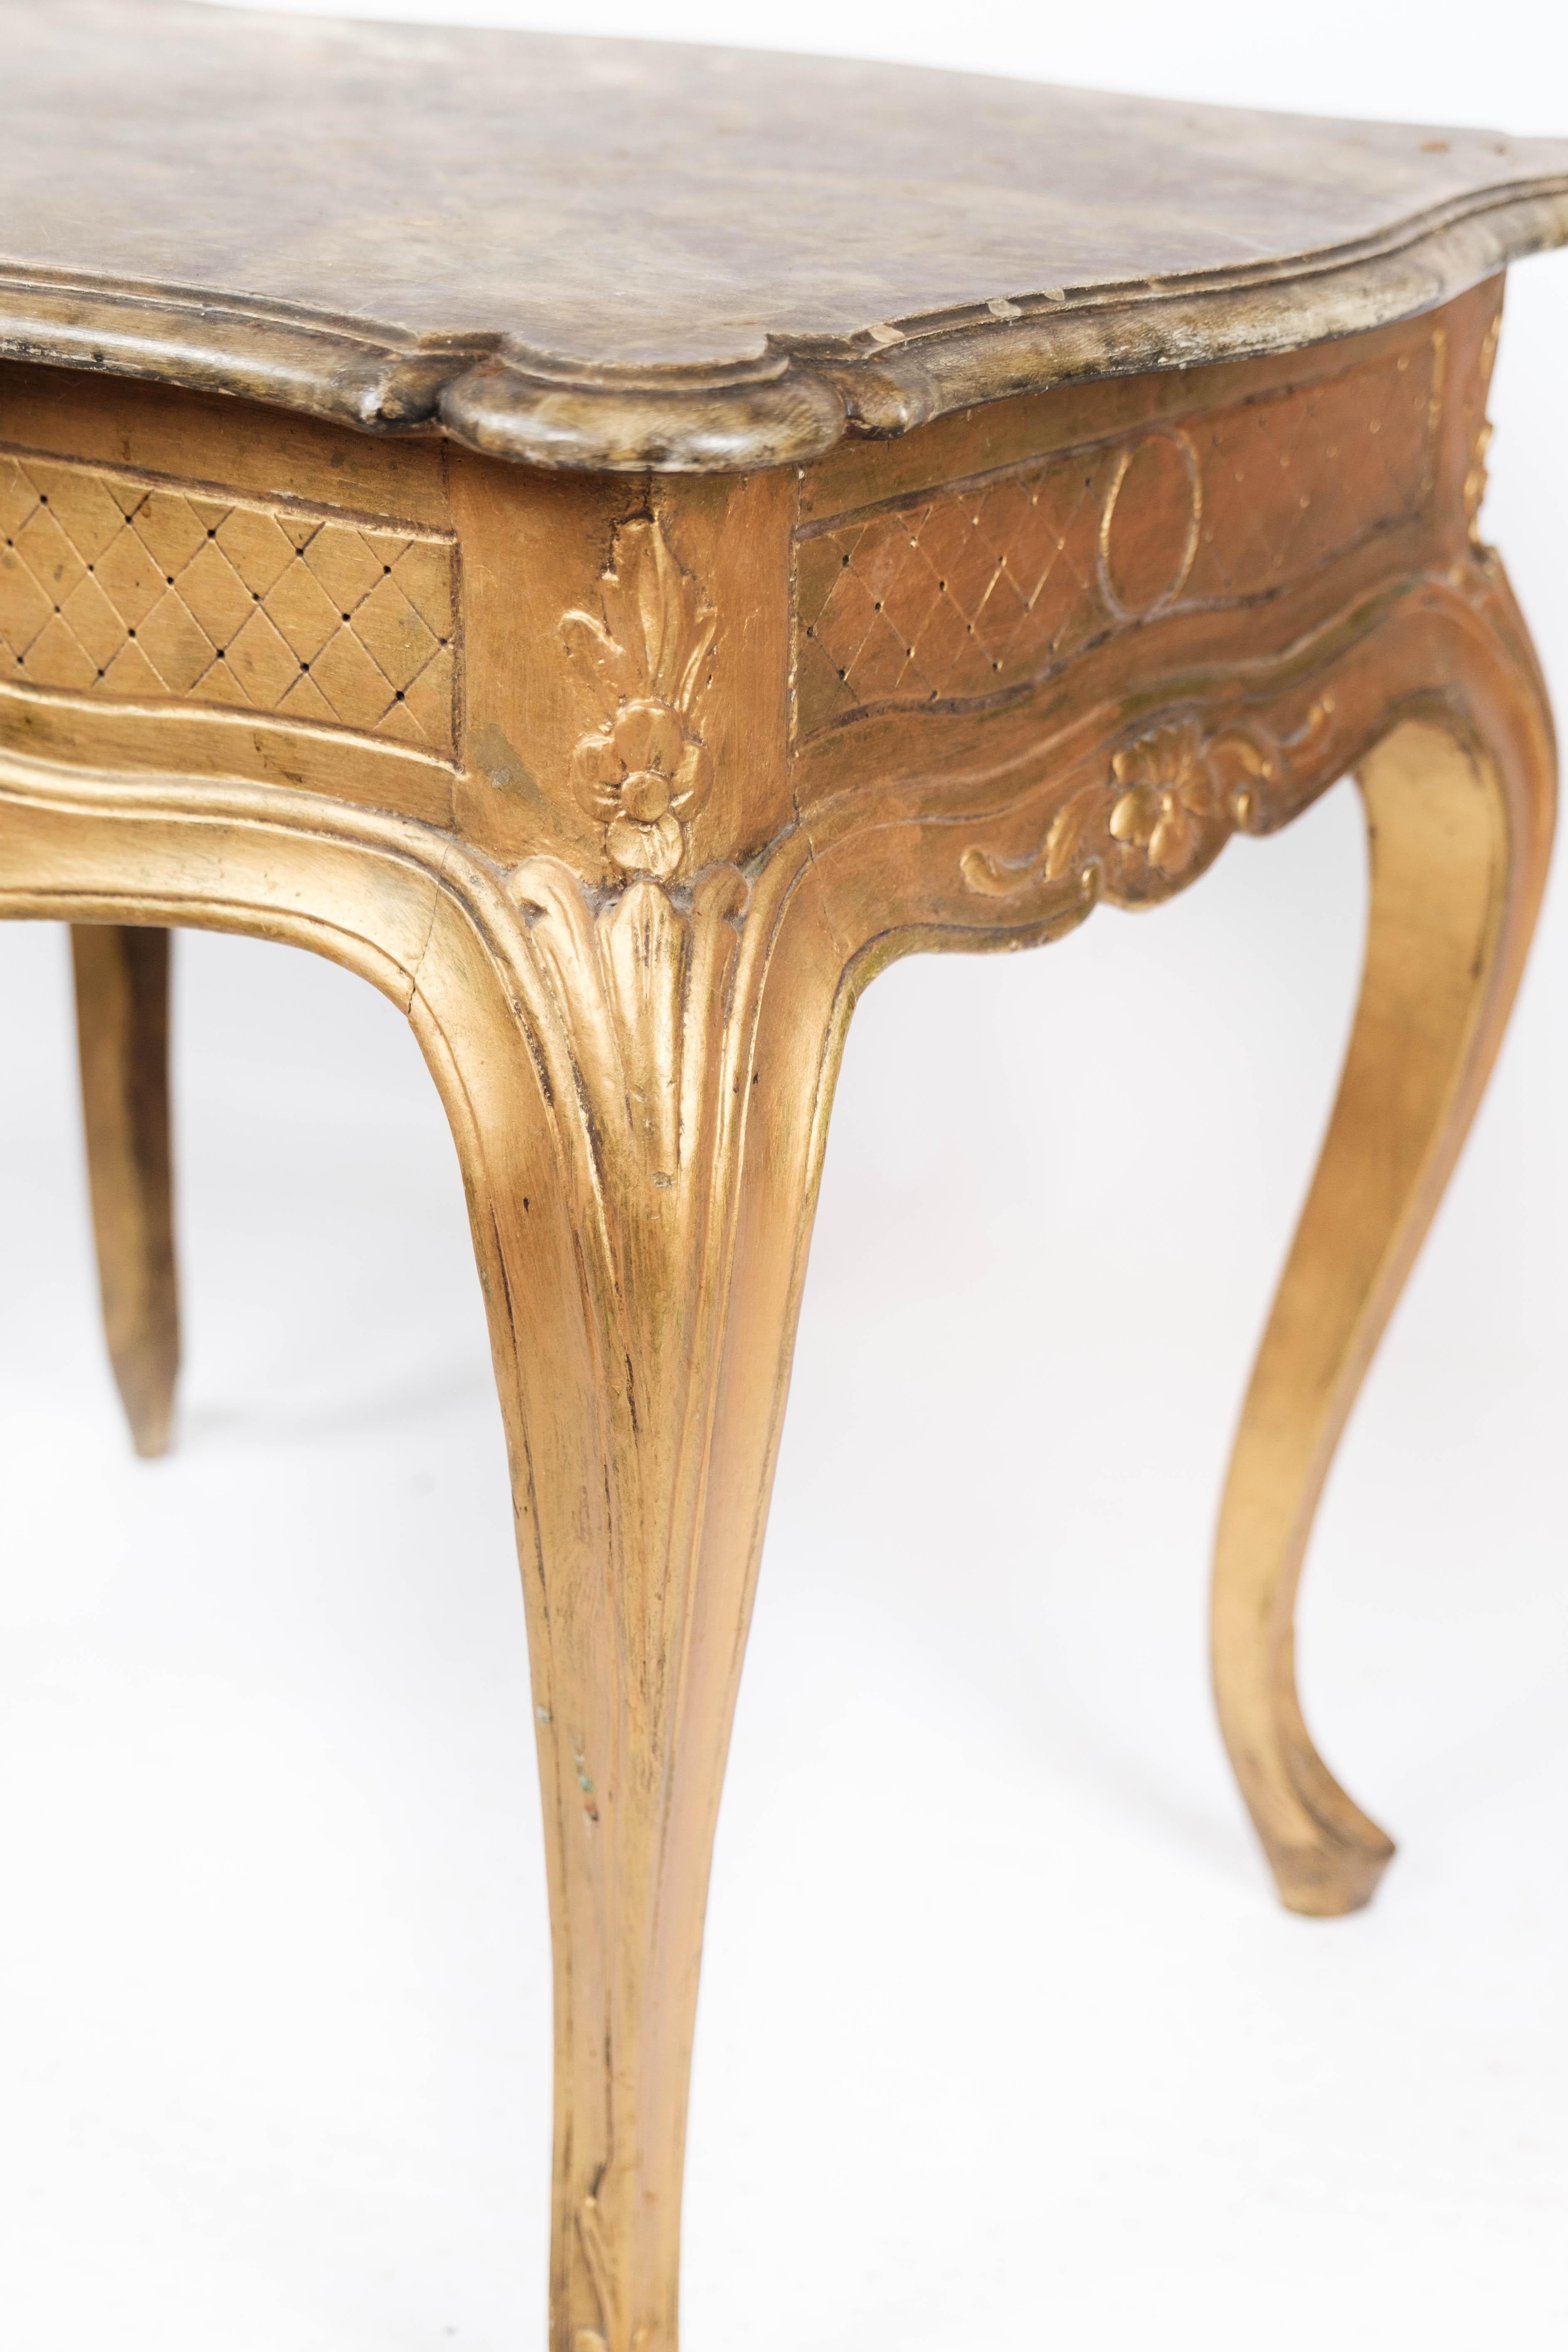 Rococo Revival Side Table with Marbled Tabletop and Frame of Gilded Wood, 1860s For Sale 2